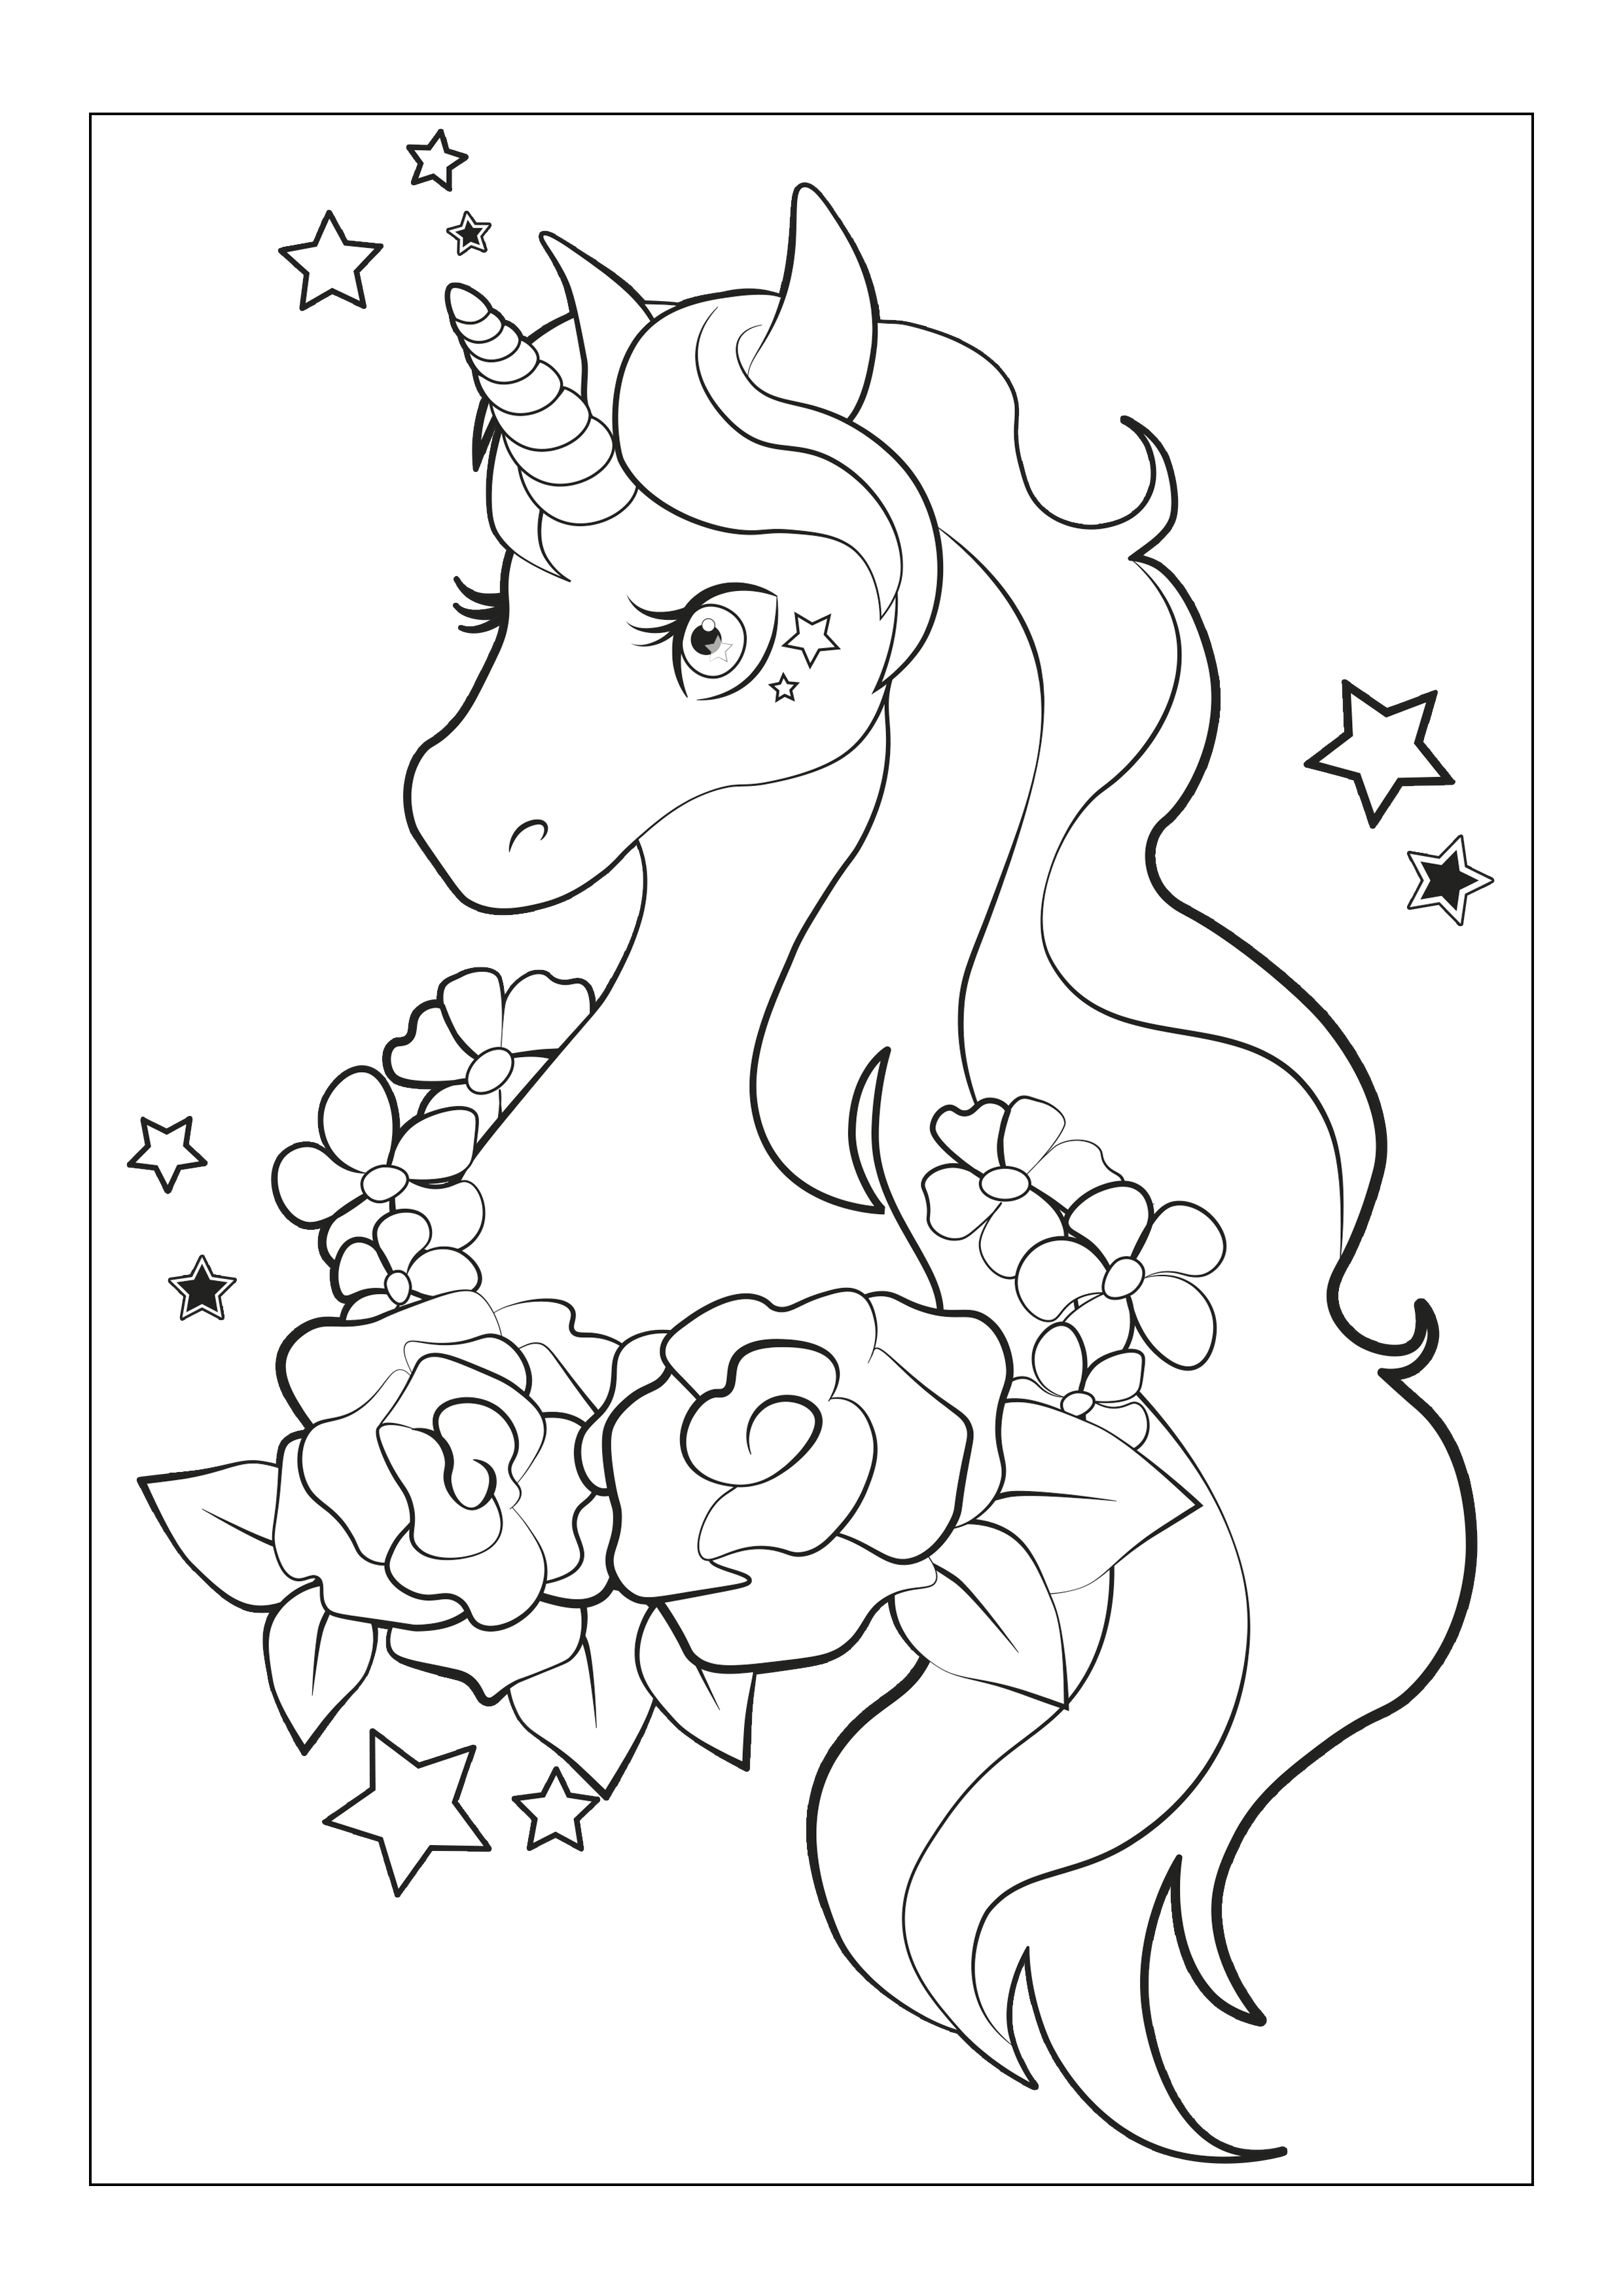 free girl coloring pages